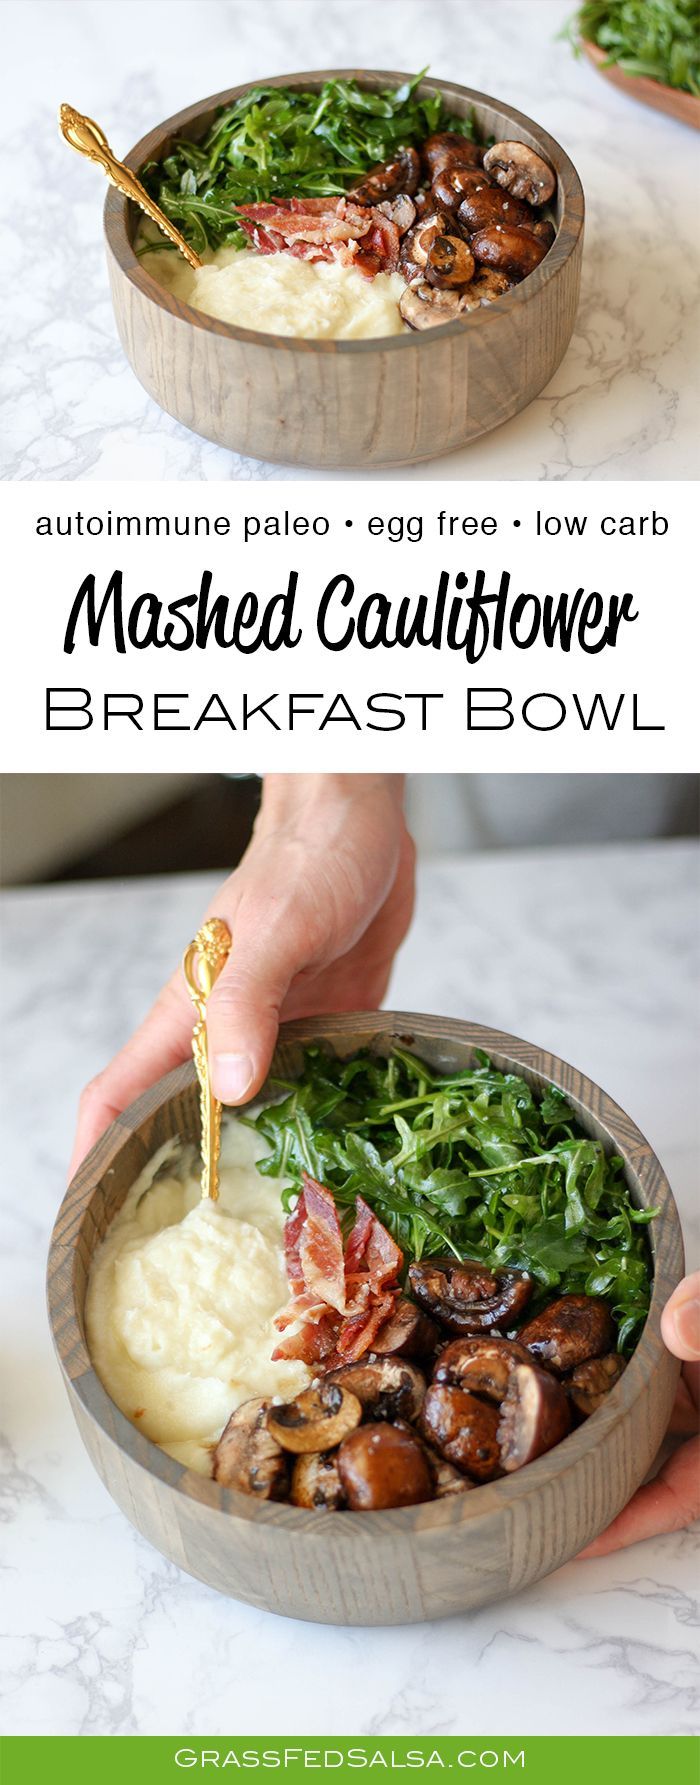 Get the recipe for this low carb, gluten free, and AIP Friendly breakfast – the Mashed Cauliflower Breakfast Bowl